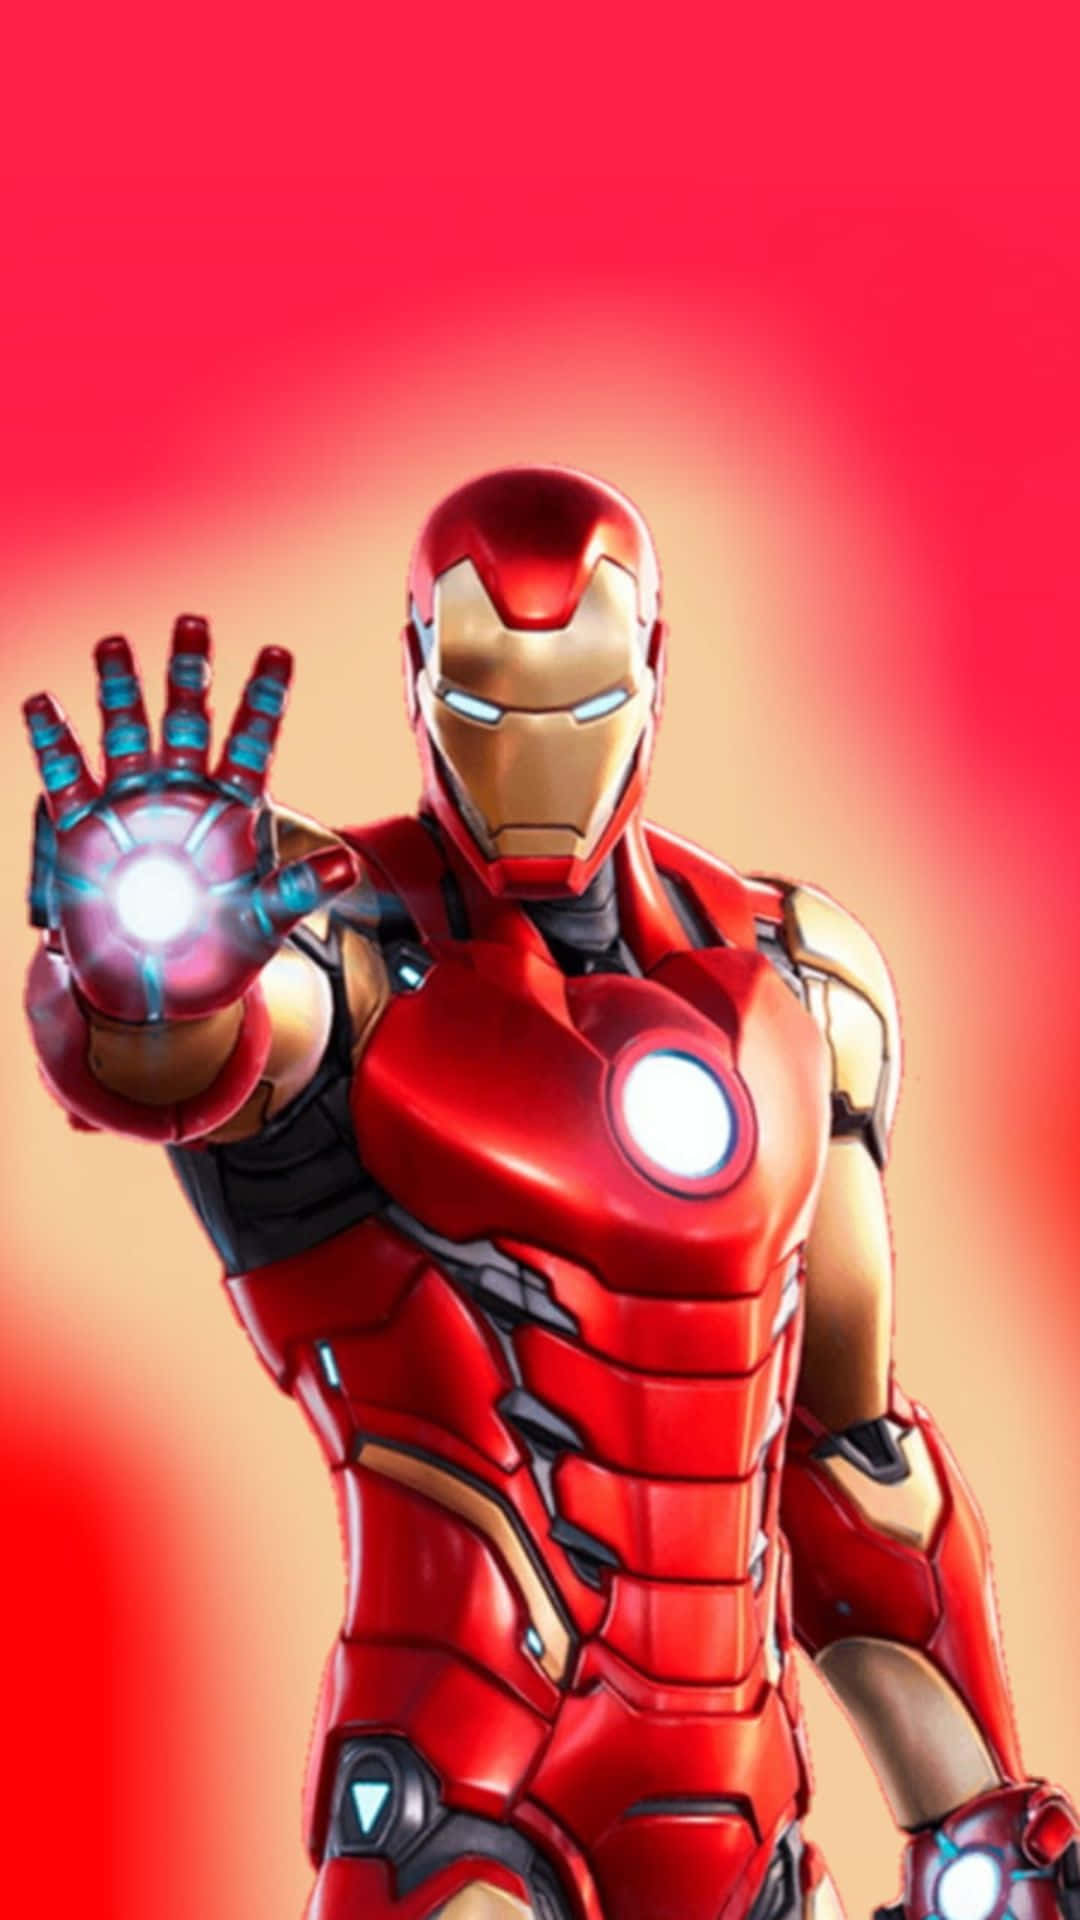 Be Like Iron Man - Personalize Your Android Home Screen with an Iron Man Themed Background